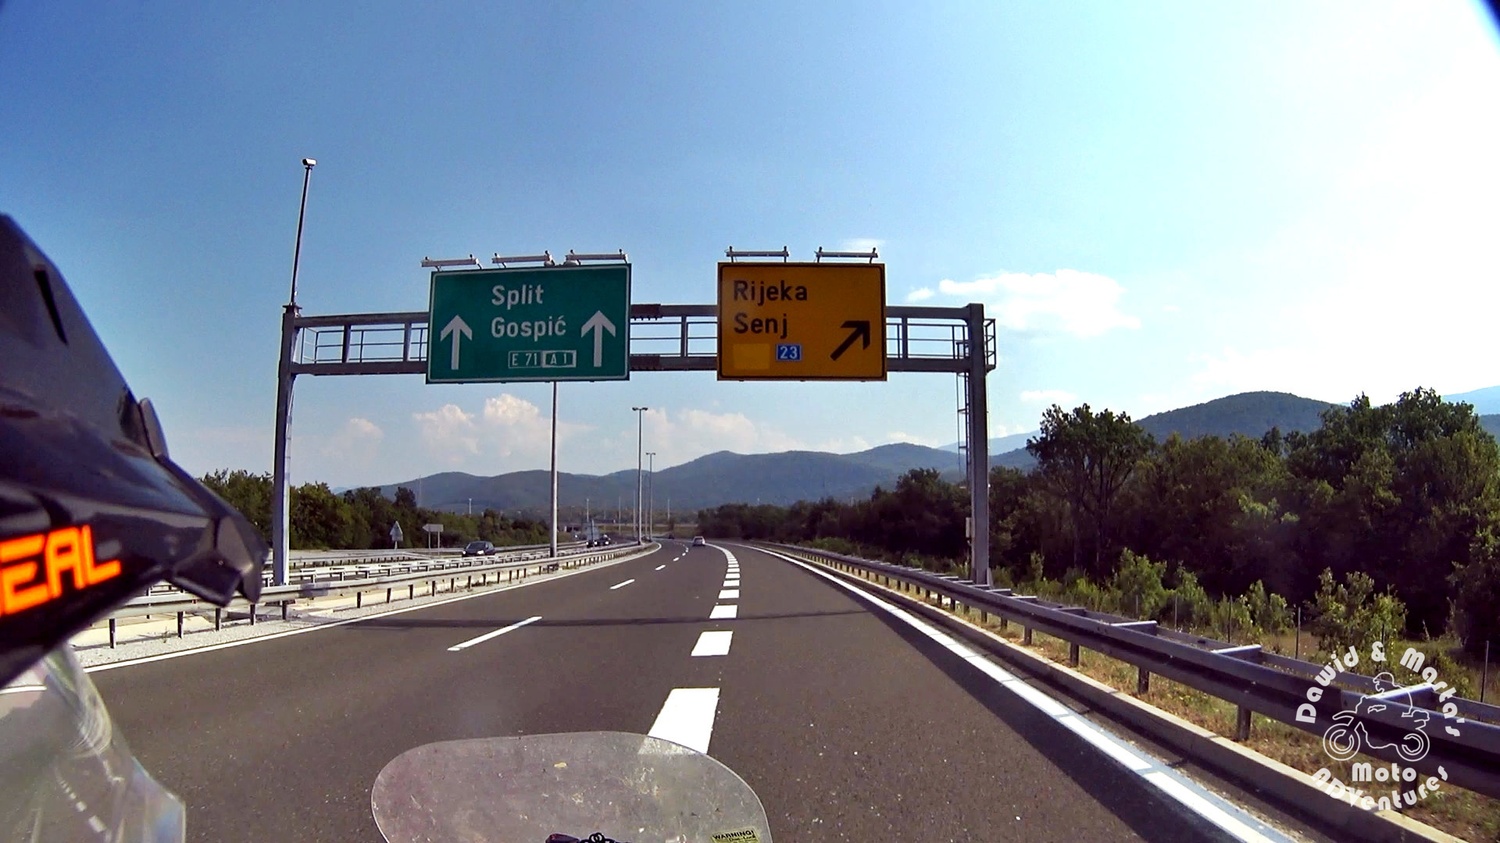 Exit from E71 road to road 23 to Senj, Croatia